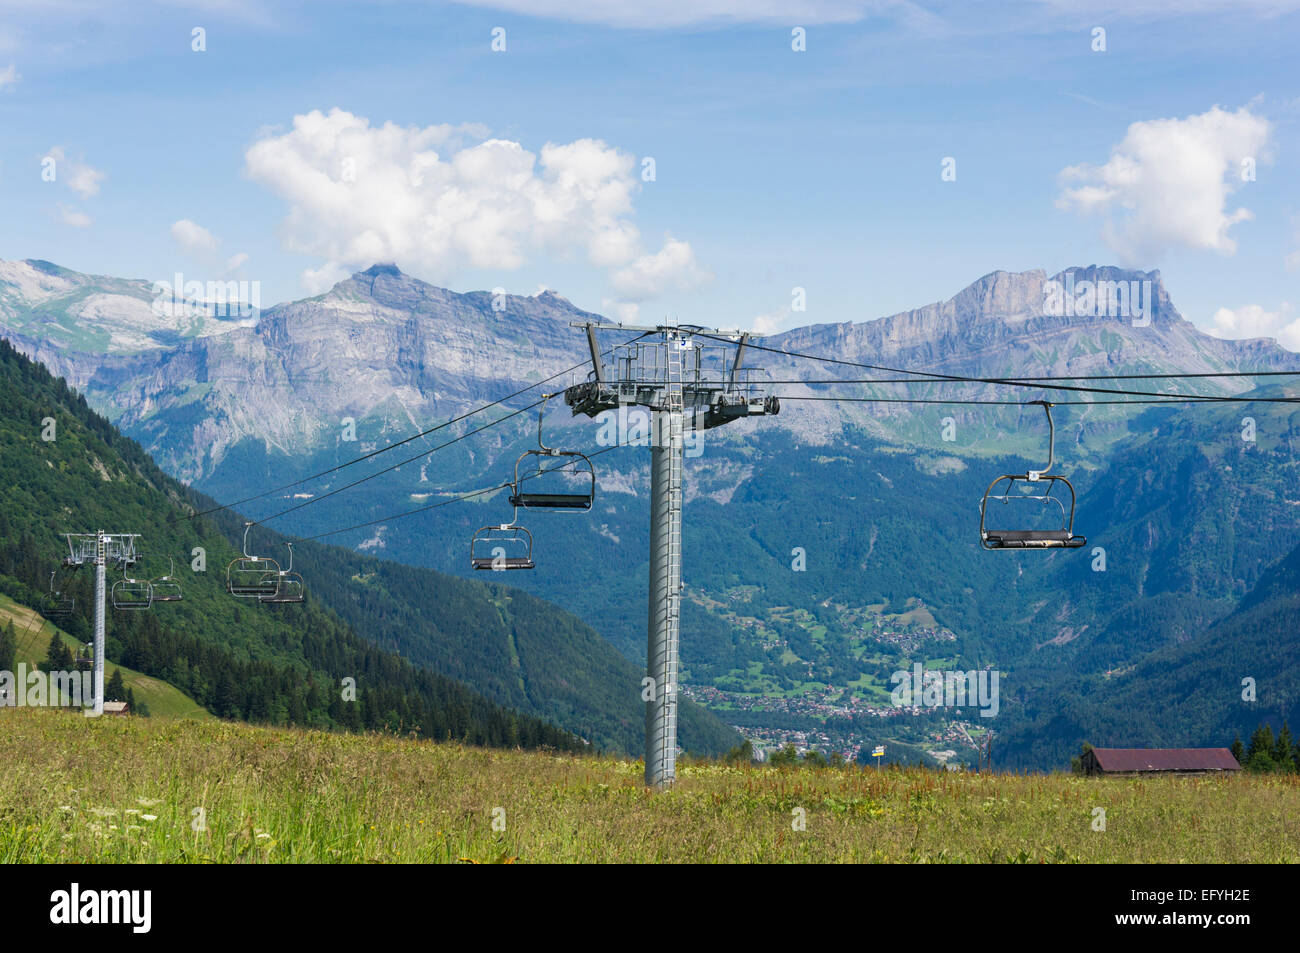 Ski lift with Rocher des Fiz mountain range and Servoz behind near Chamonix in the French Alps, France, Europe in summer Stock Photo